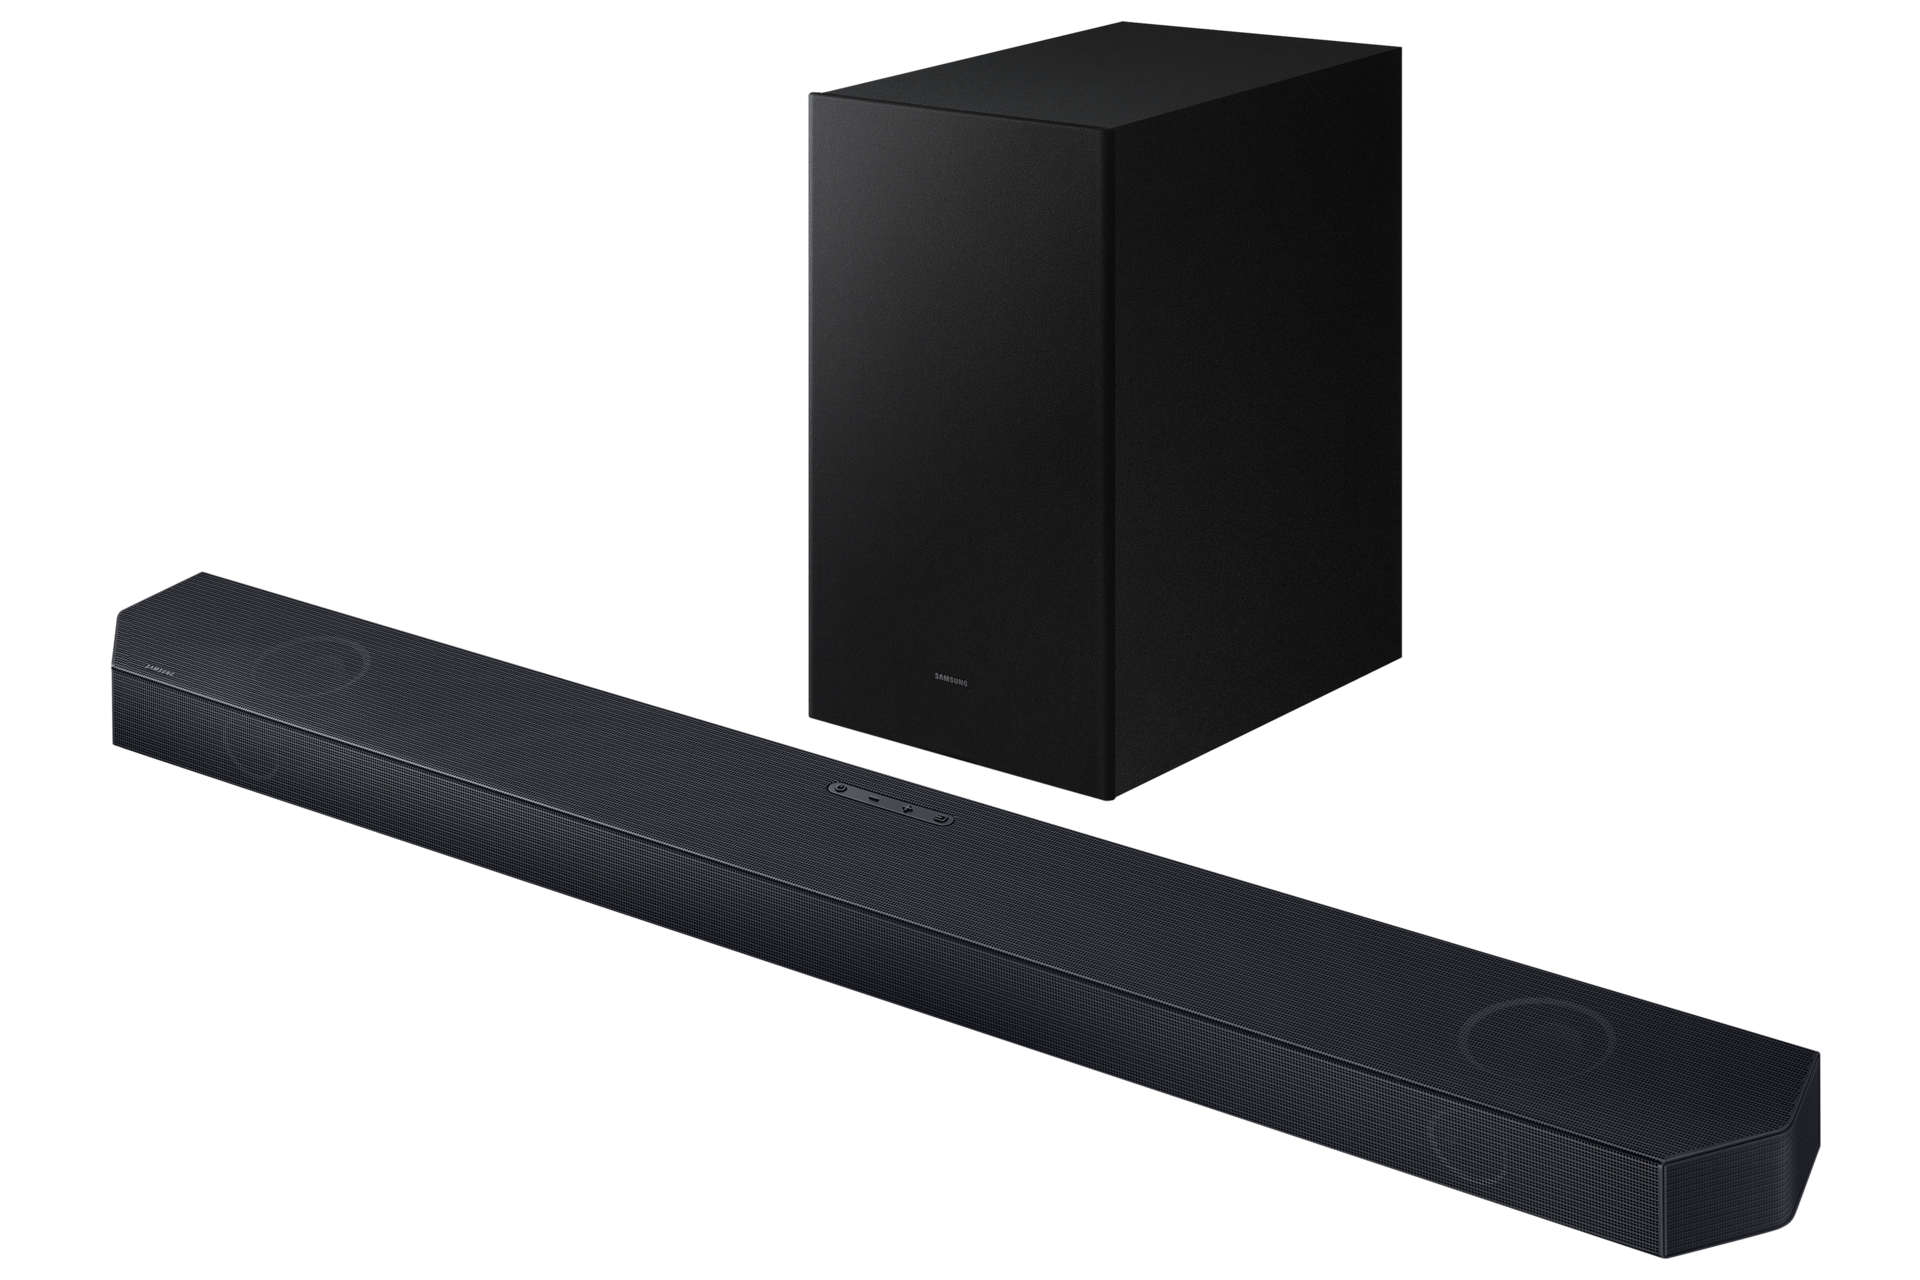 Latest Samsung Q Series Soundbar with Subwoofer (HW-Q700C/XM) - set-r-perspective view, Titan Black color at best price in Samsung Malaysia